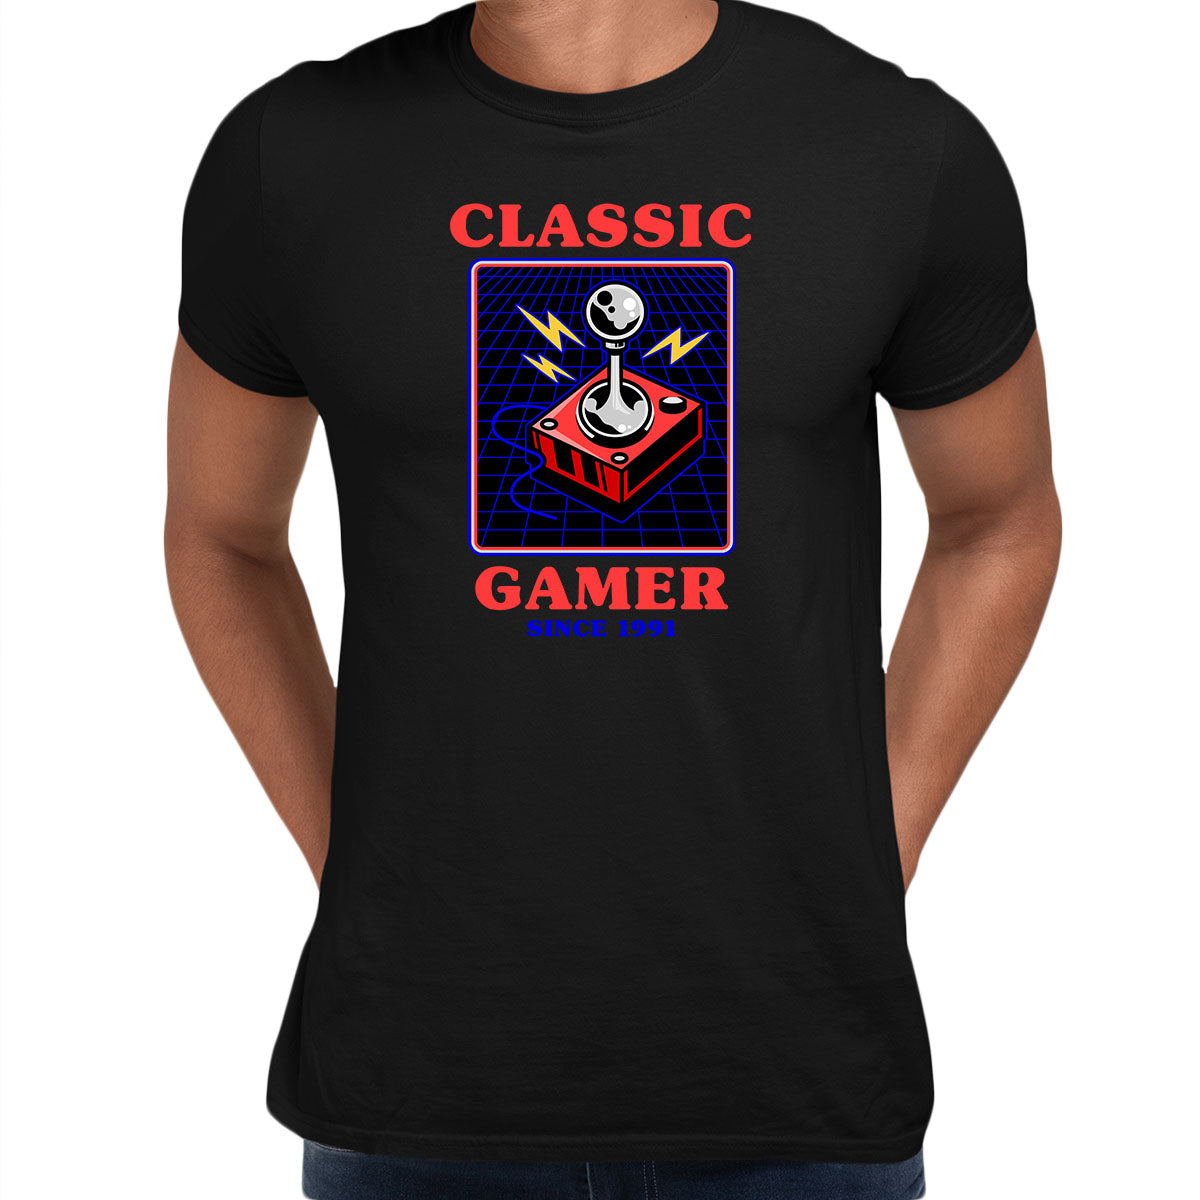 Retro Game 80's Collection Eight Classic Gamer Since 1991 Typography Unisex T-shirt - Kuzi Tees